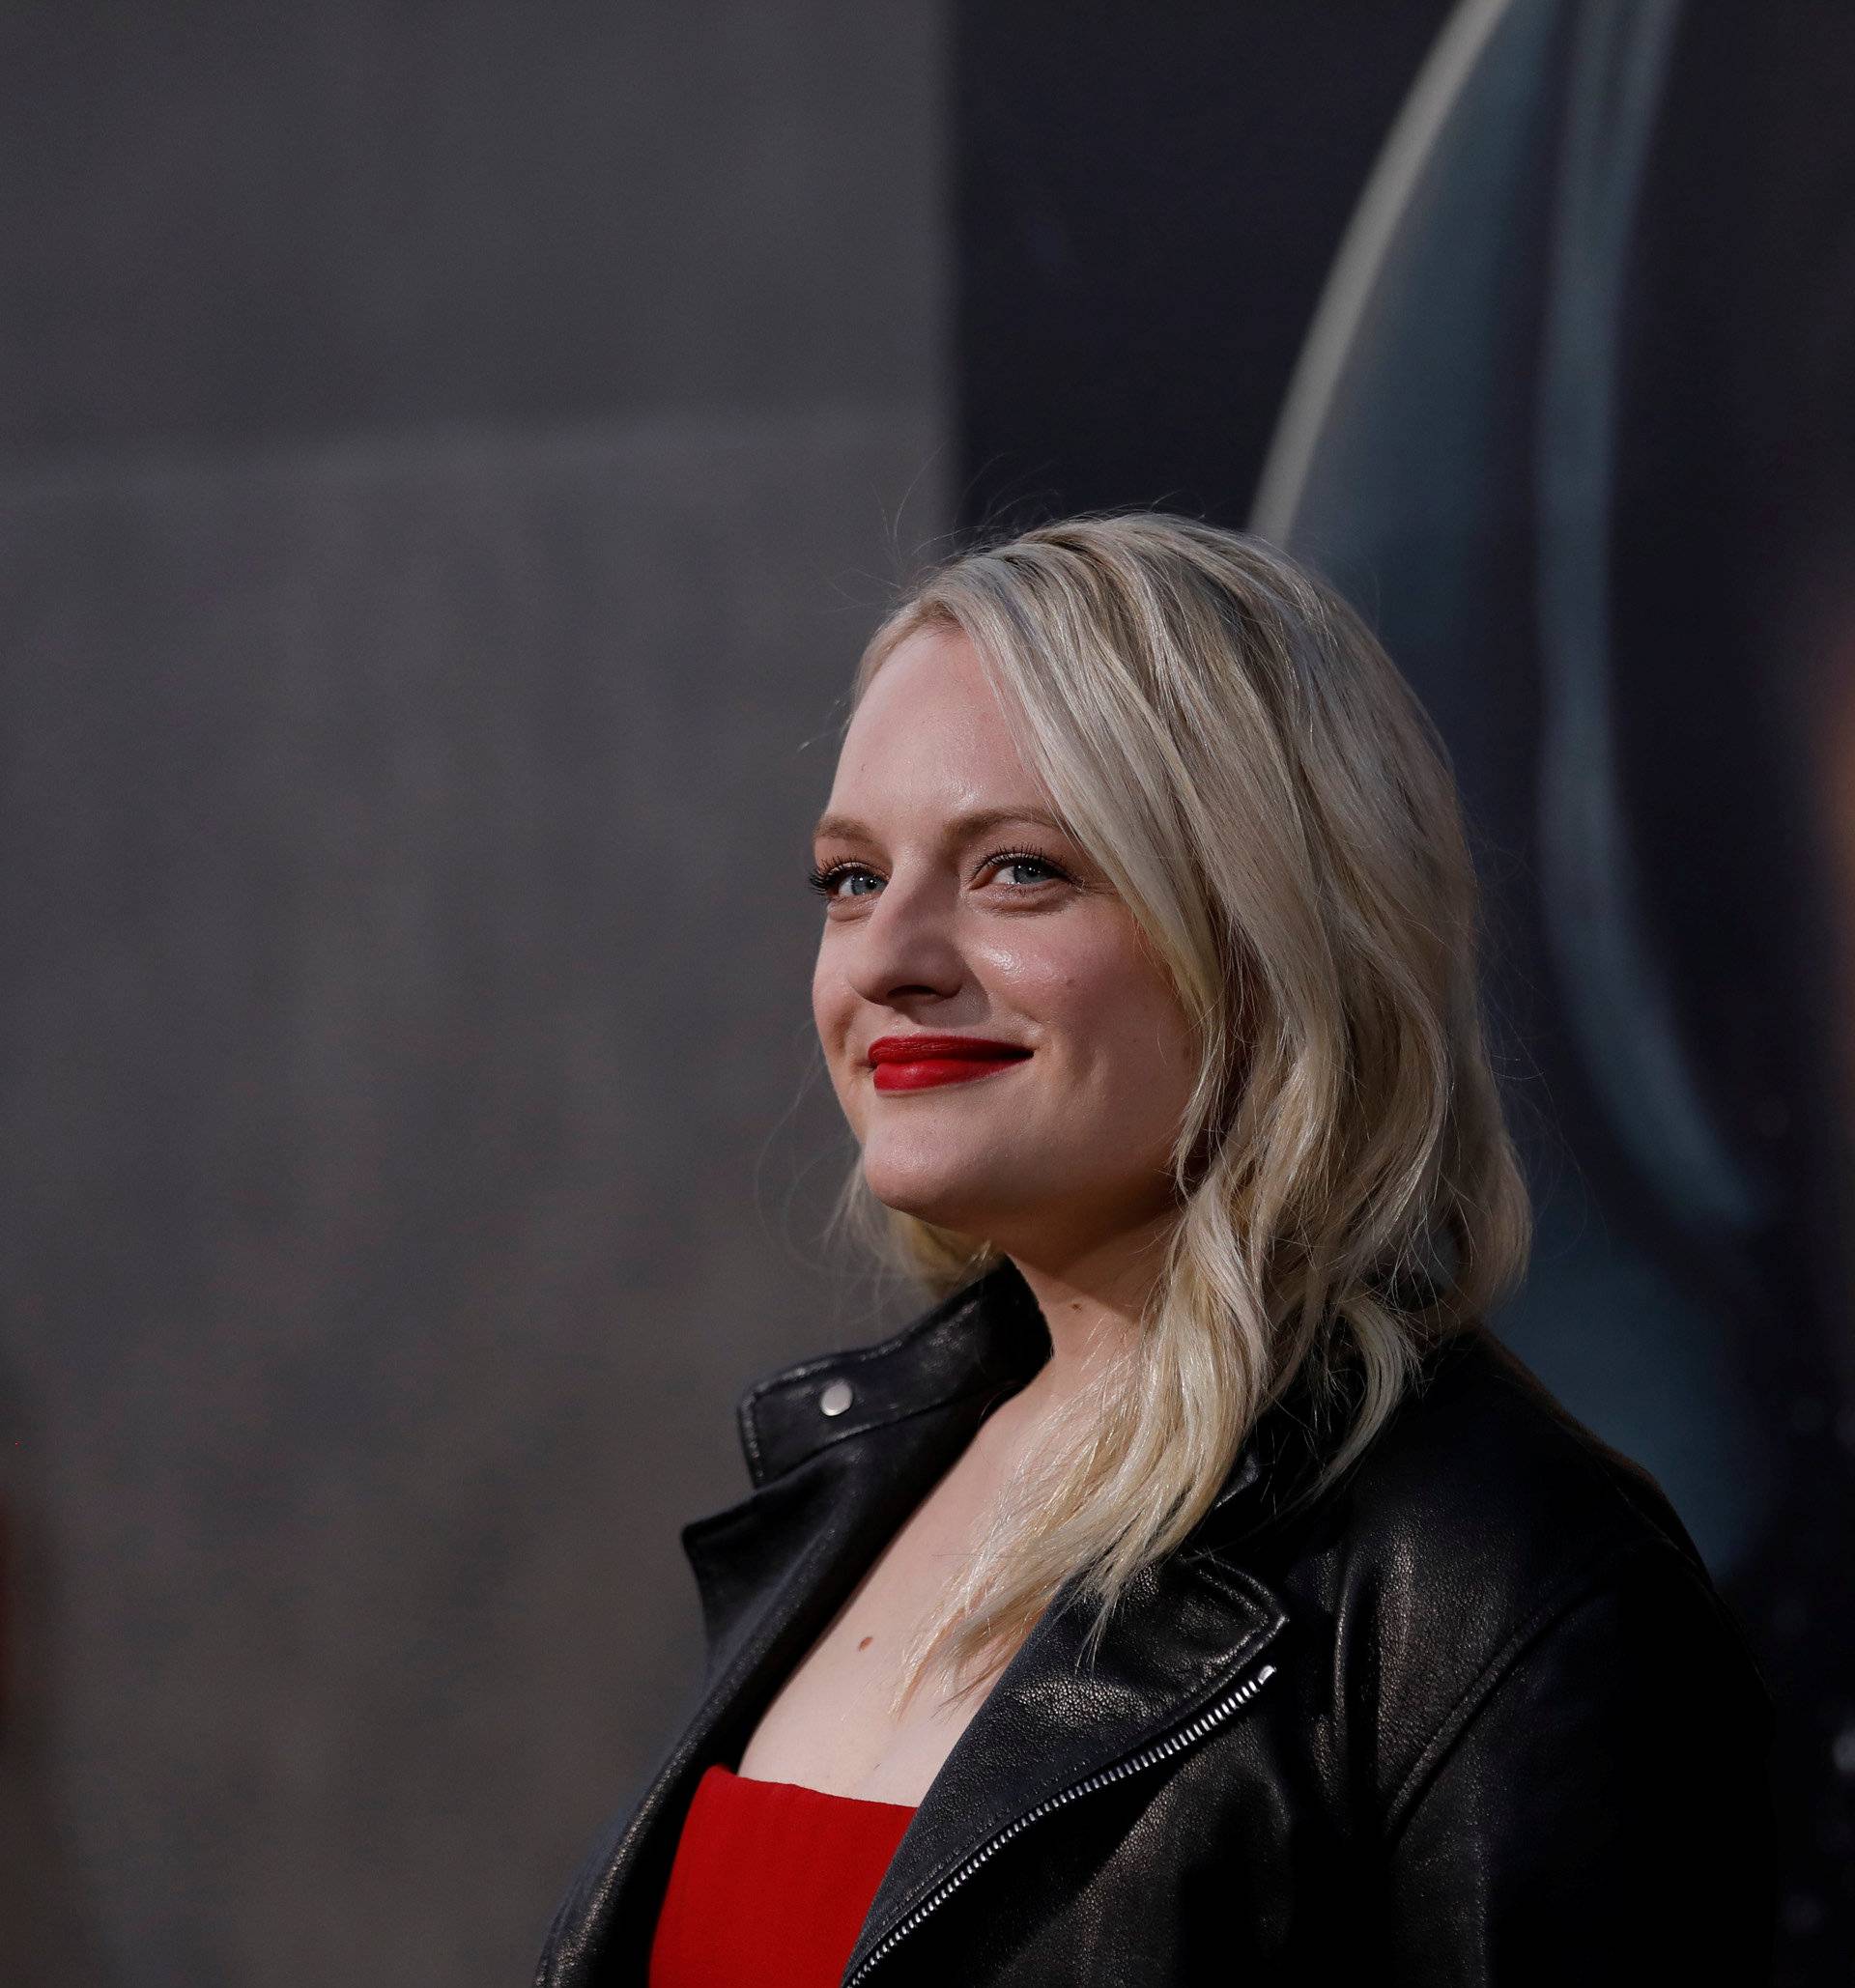 Cast member Moss poses at the premiere for the second season of the television series "The Handmaid's Tale" in Los Angeles